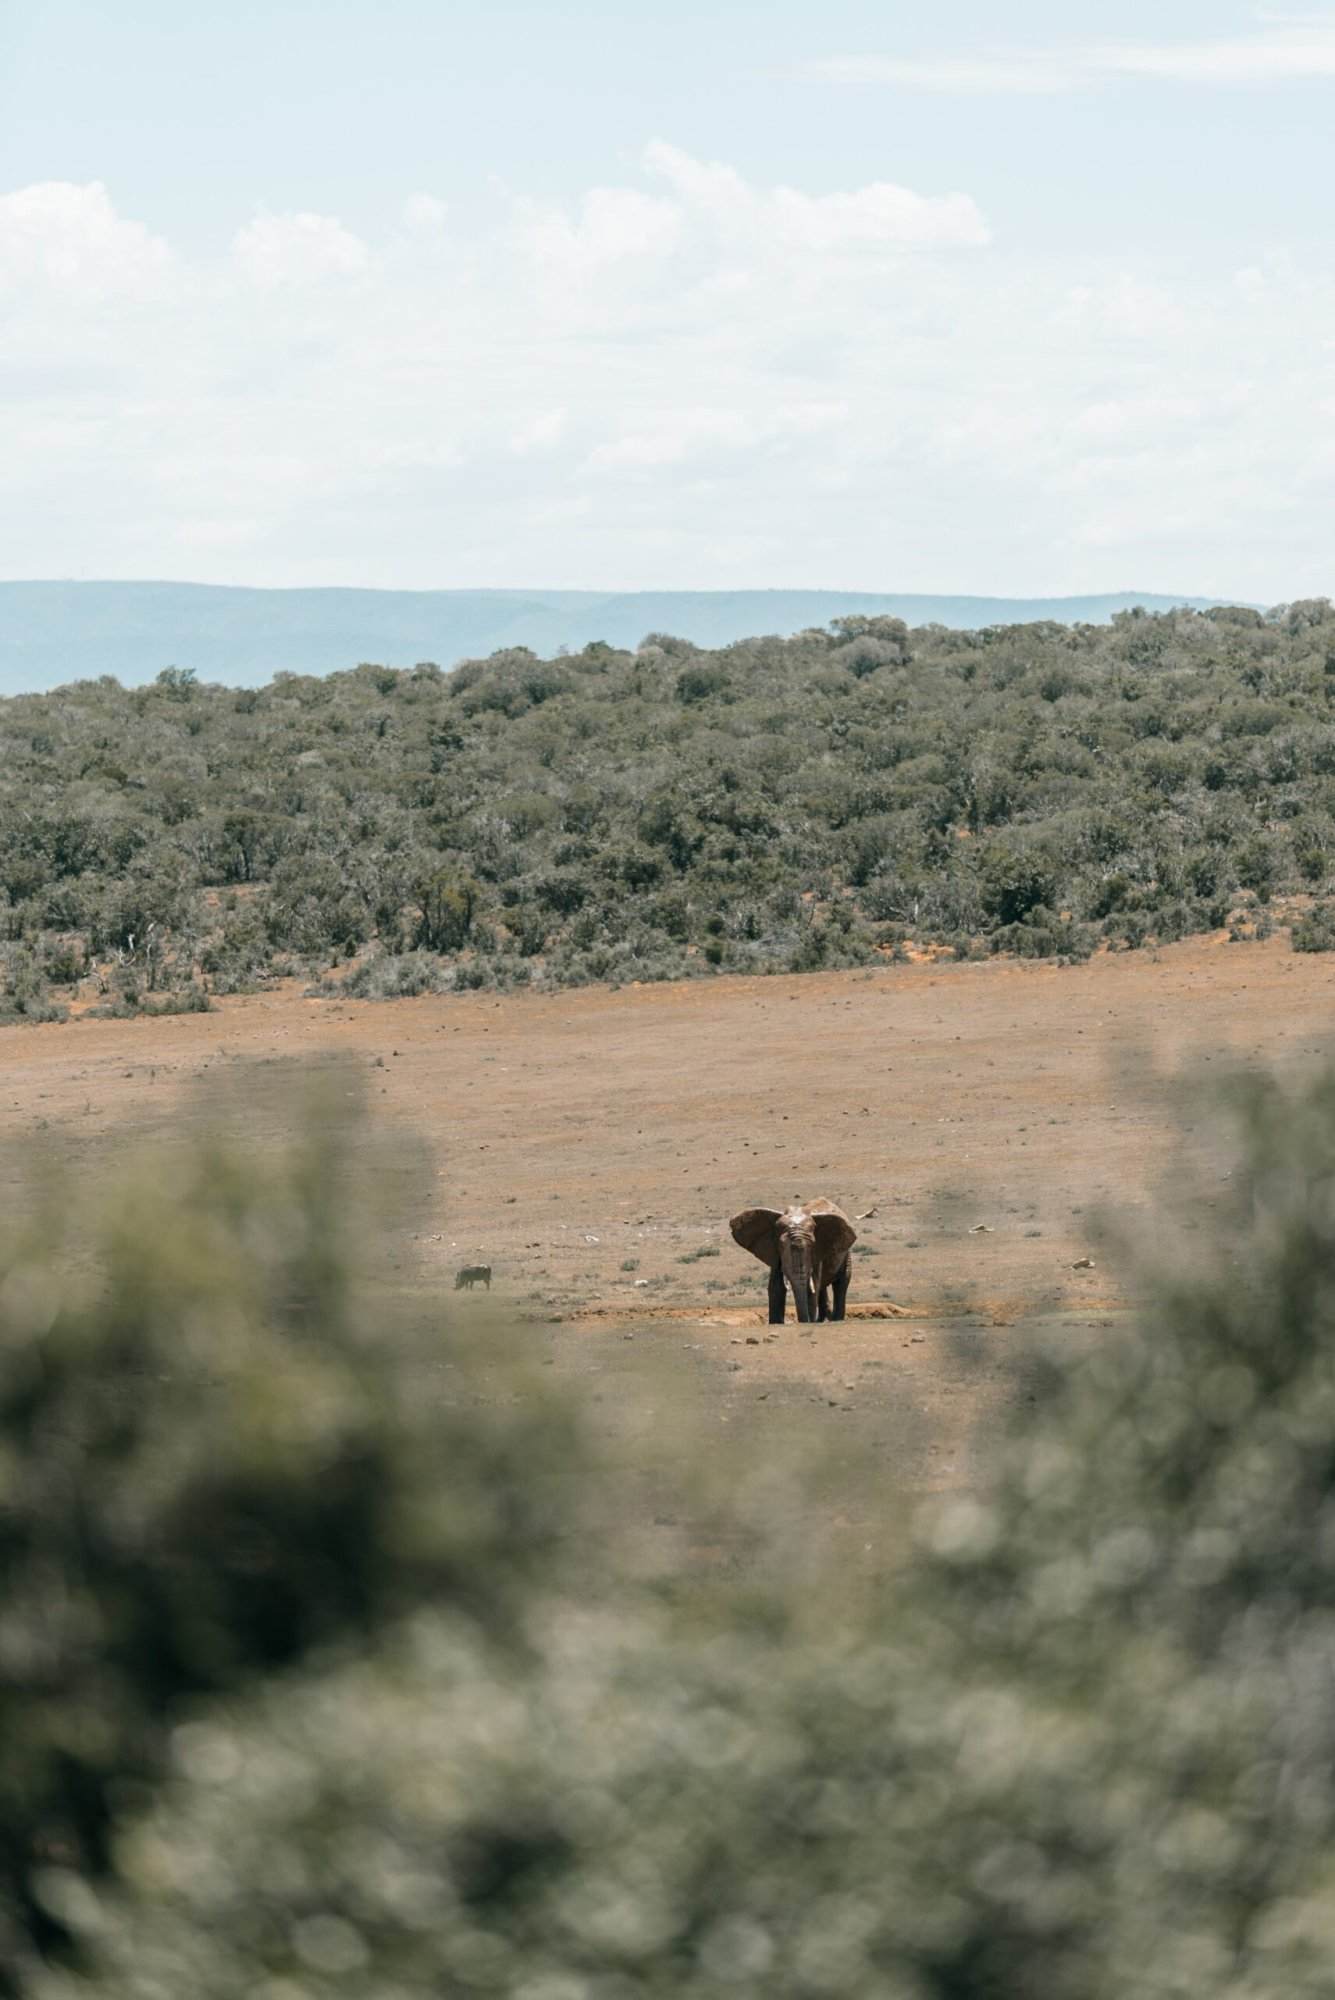 Two elephants standing in the middle of a field.